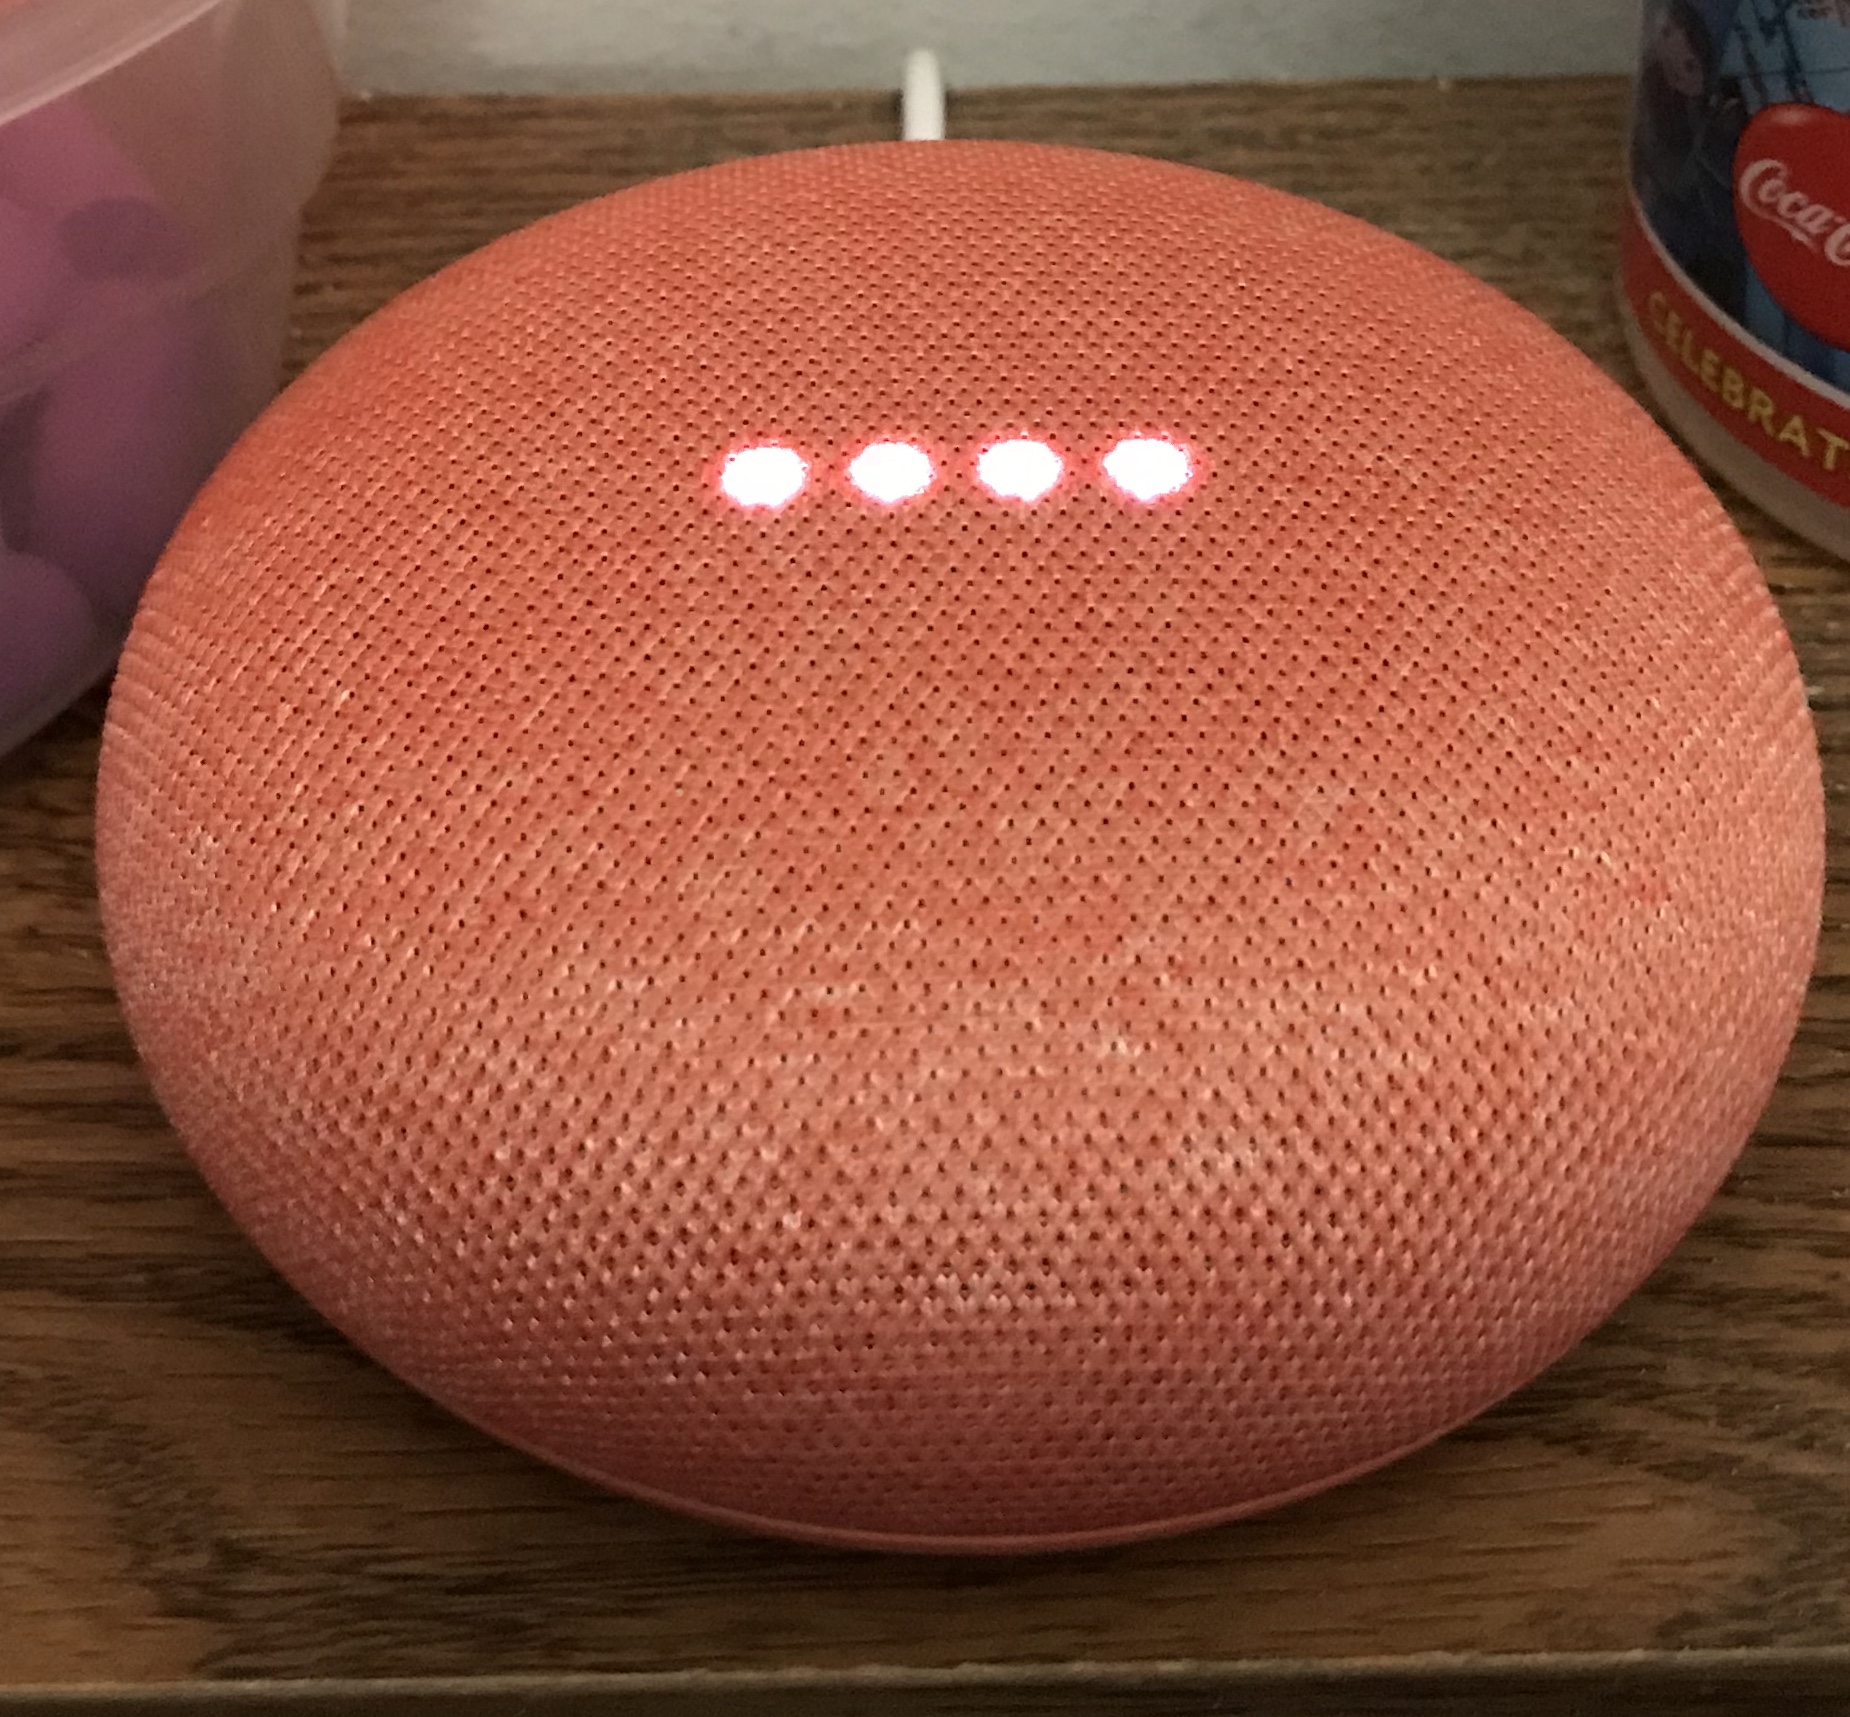 Difference between Google Home and Google Home Mini1